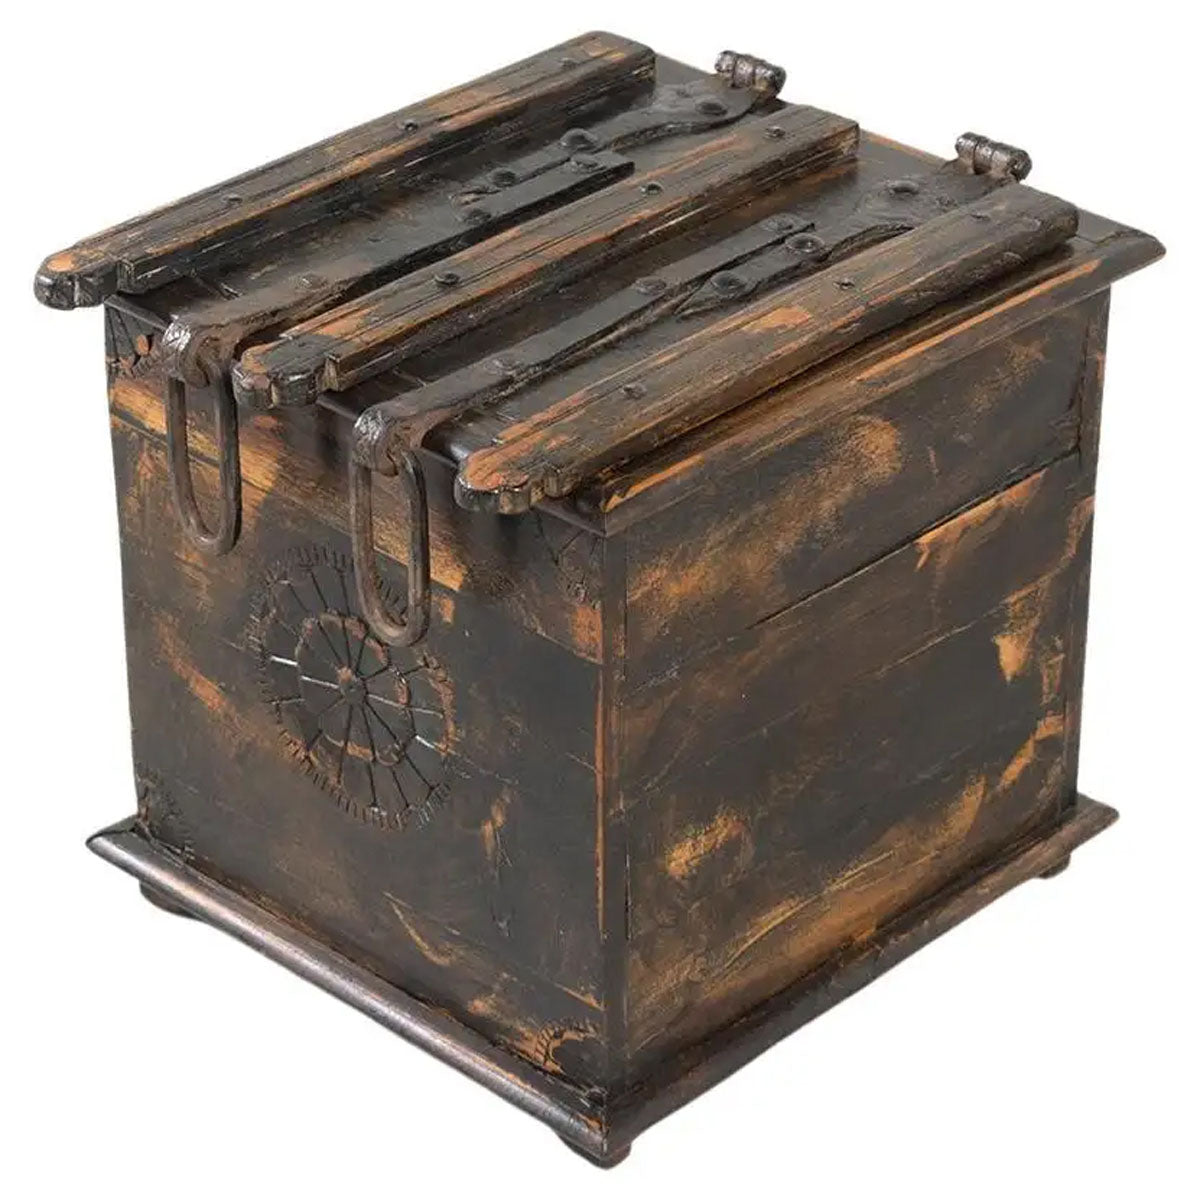 Vintage 1970s Restored Spanish-Style Wooden Trunk: Elegance Meets Practicality